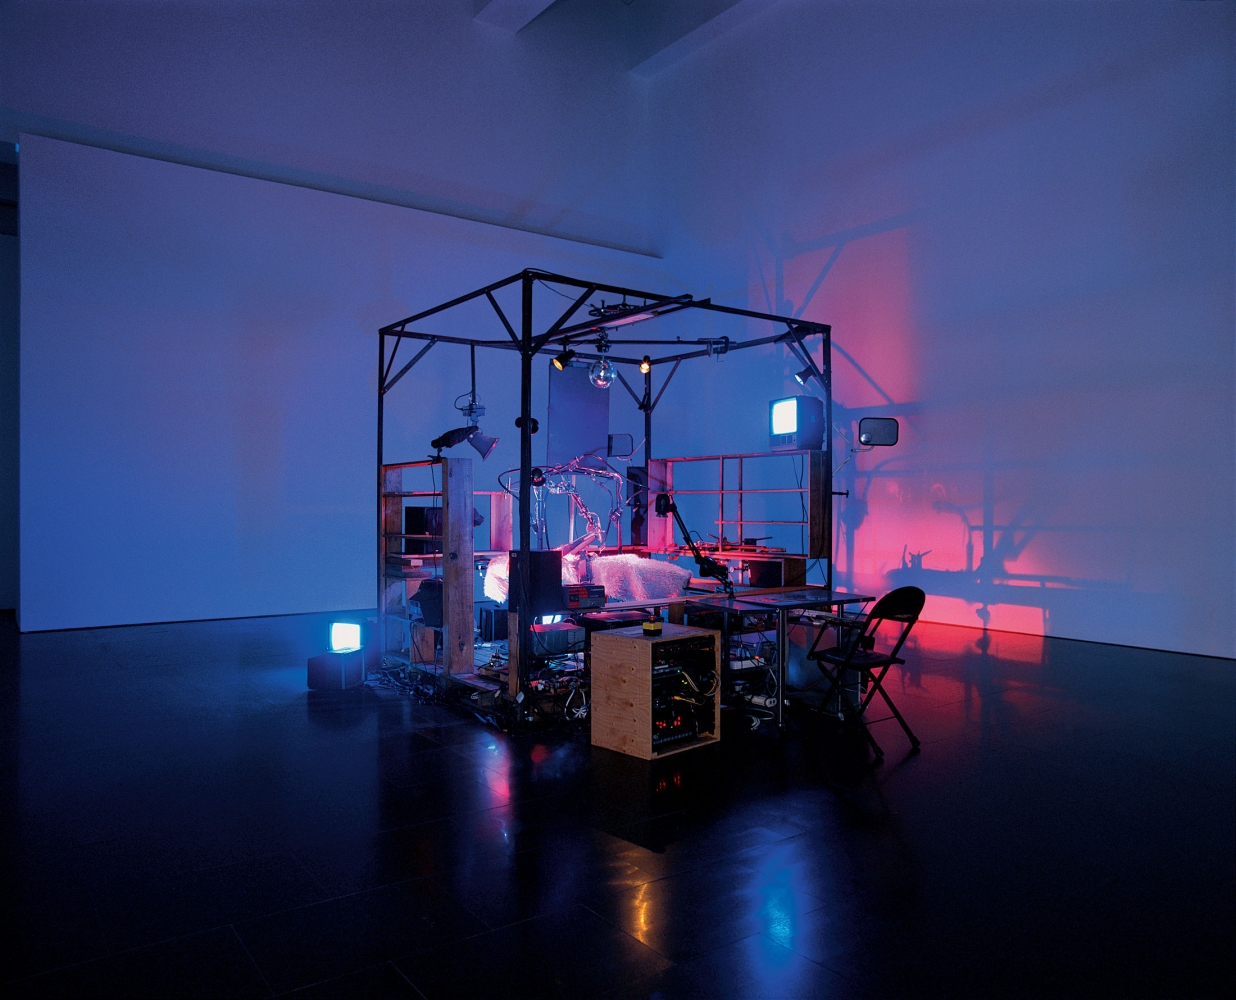 Janet Cardiff and George Bures&amp;nbsp;Miller
The Killing Machine, 2007
Mixed media/audio installation
Pneumatics and robotics
Duration: 5 minutes
94 x 156 1/2 x 98 1/2&amp;nbsp;inches
(238.8 x 397.5 x 250.2 cm)